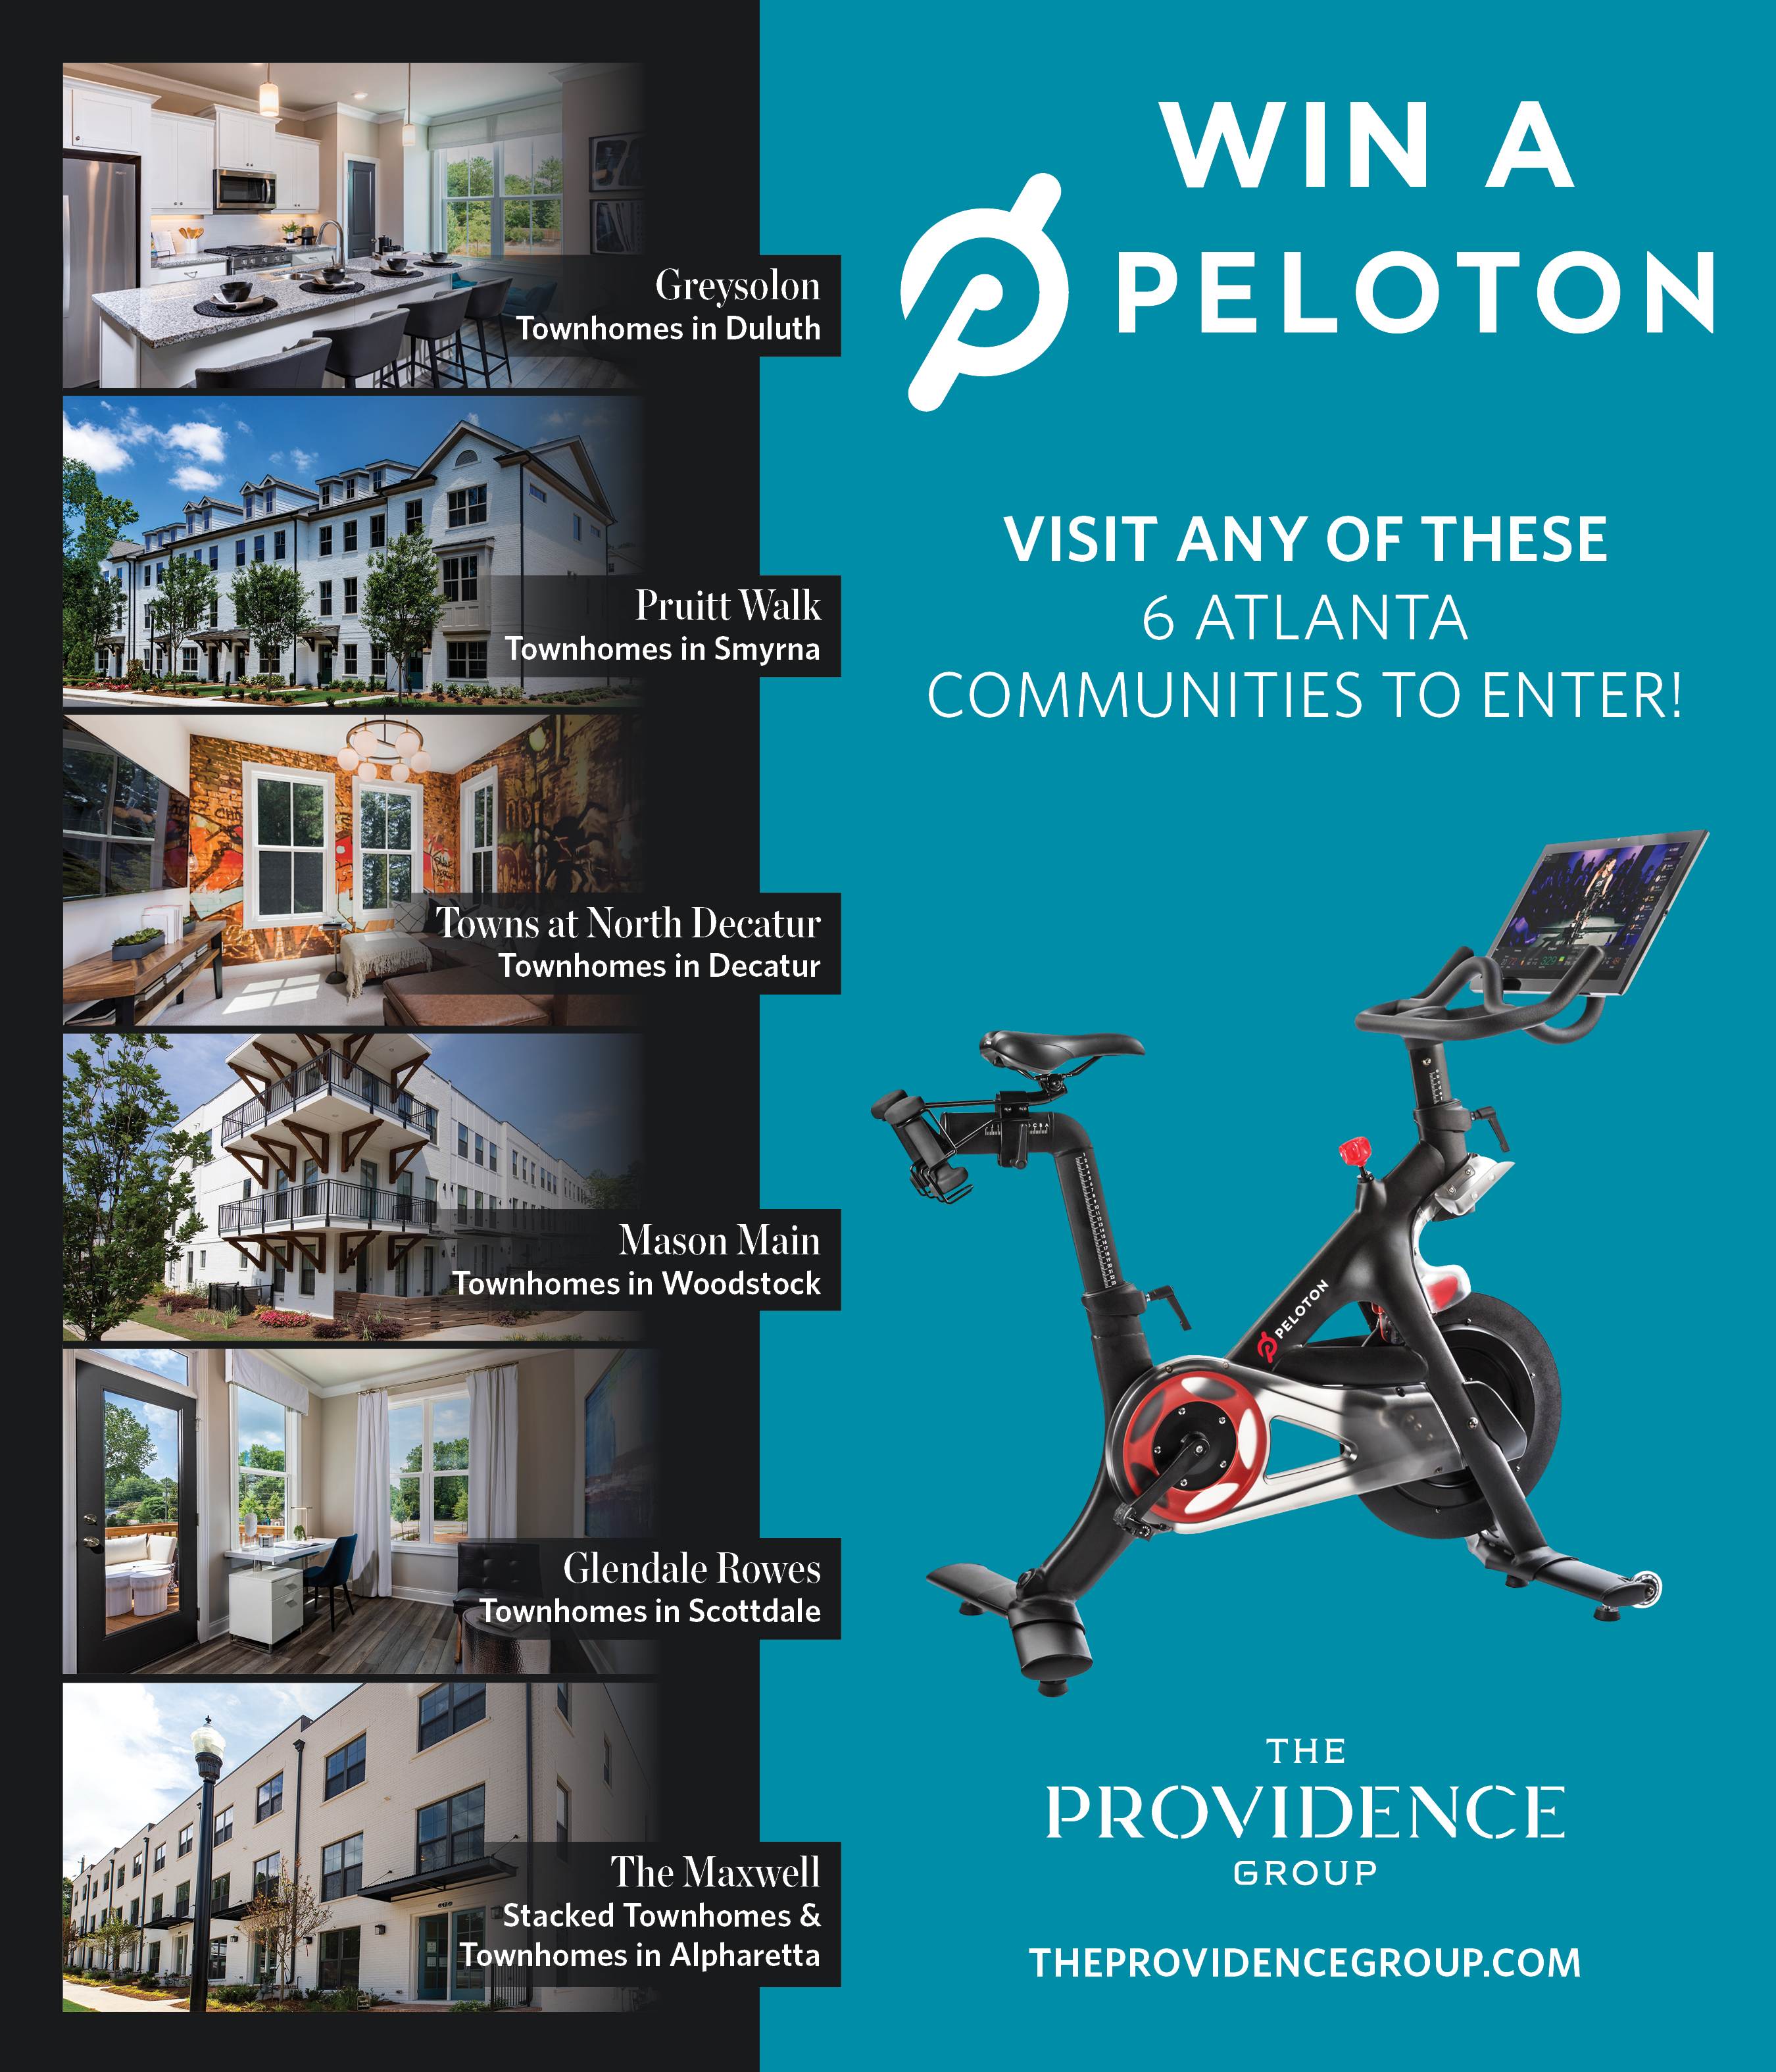 Providence Group Announces Peloton Giveaway at Select Communities